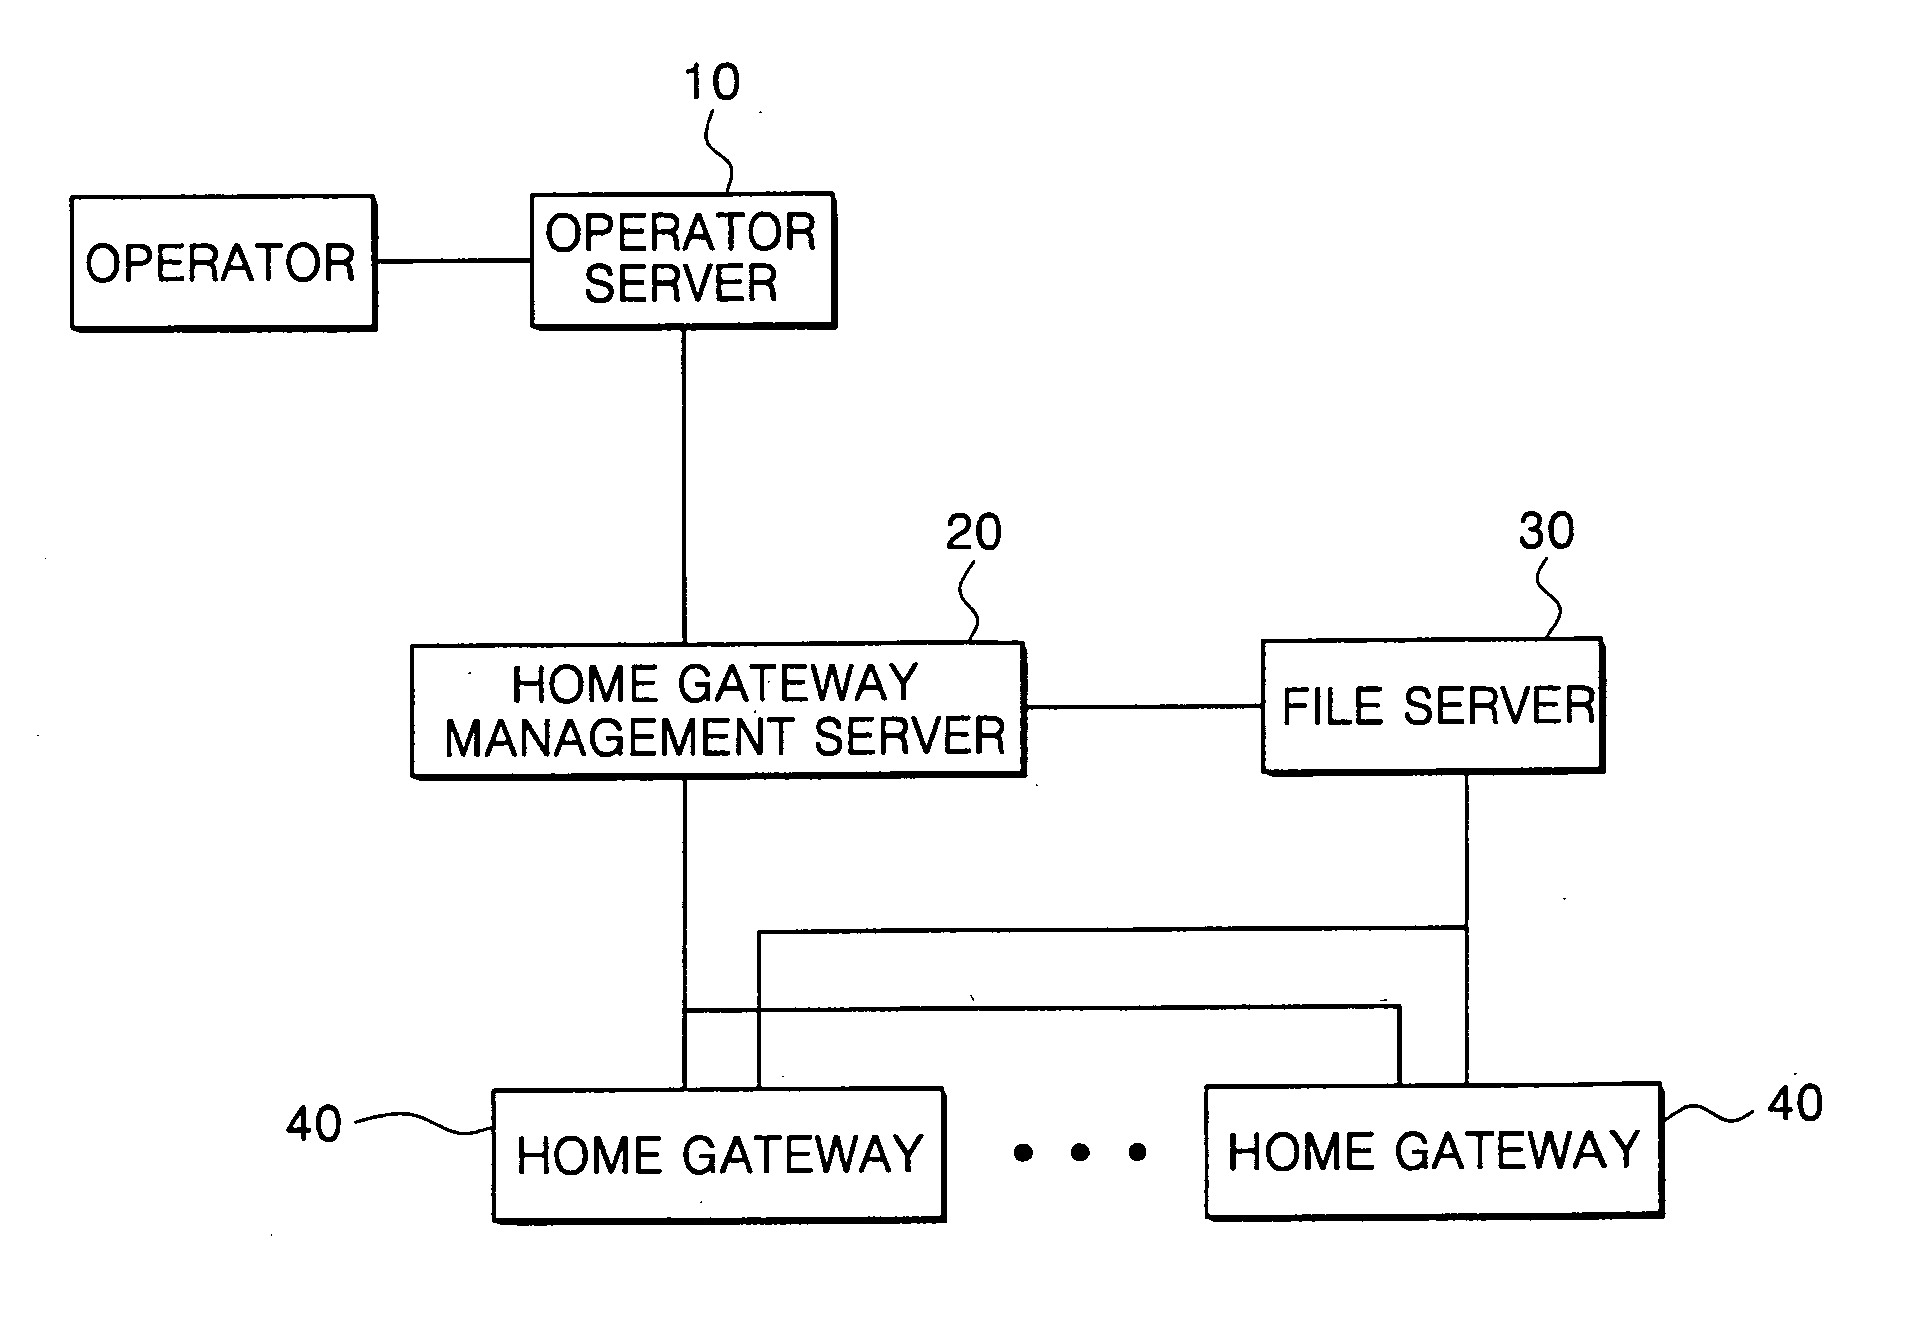 Environment setup apparatus and method for home gateway system